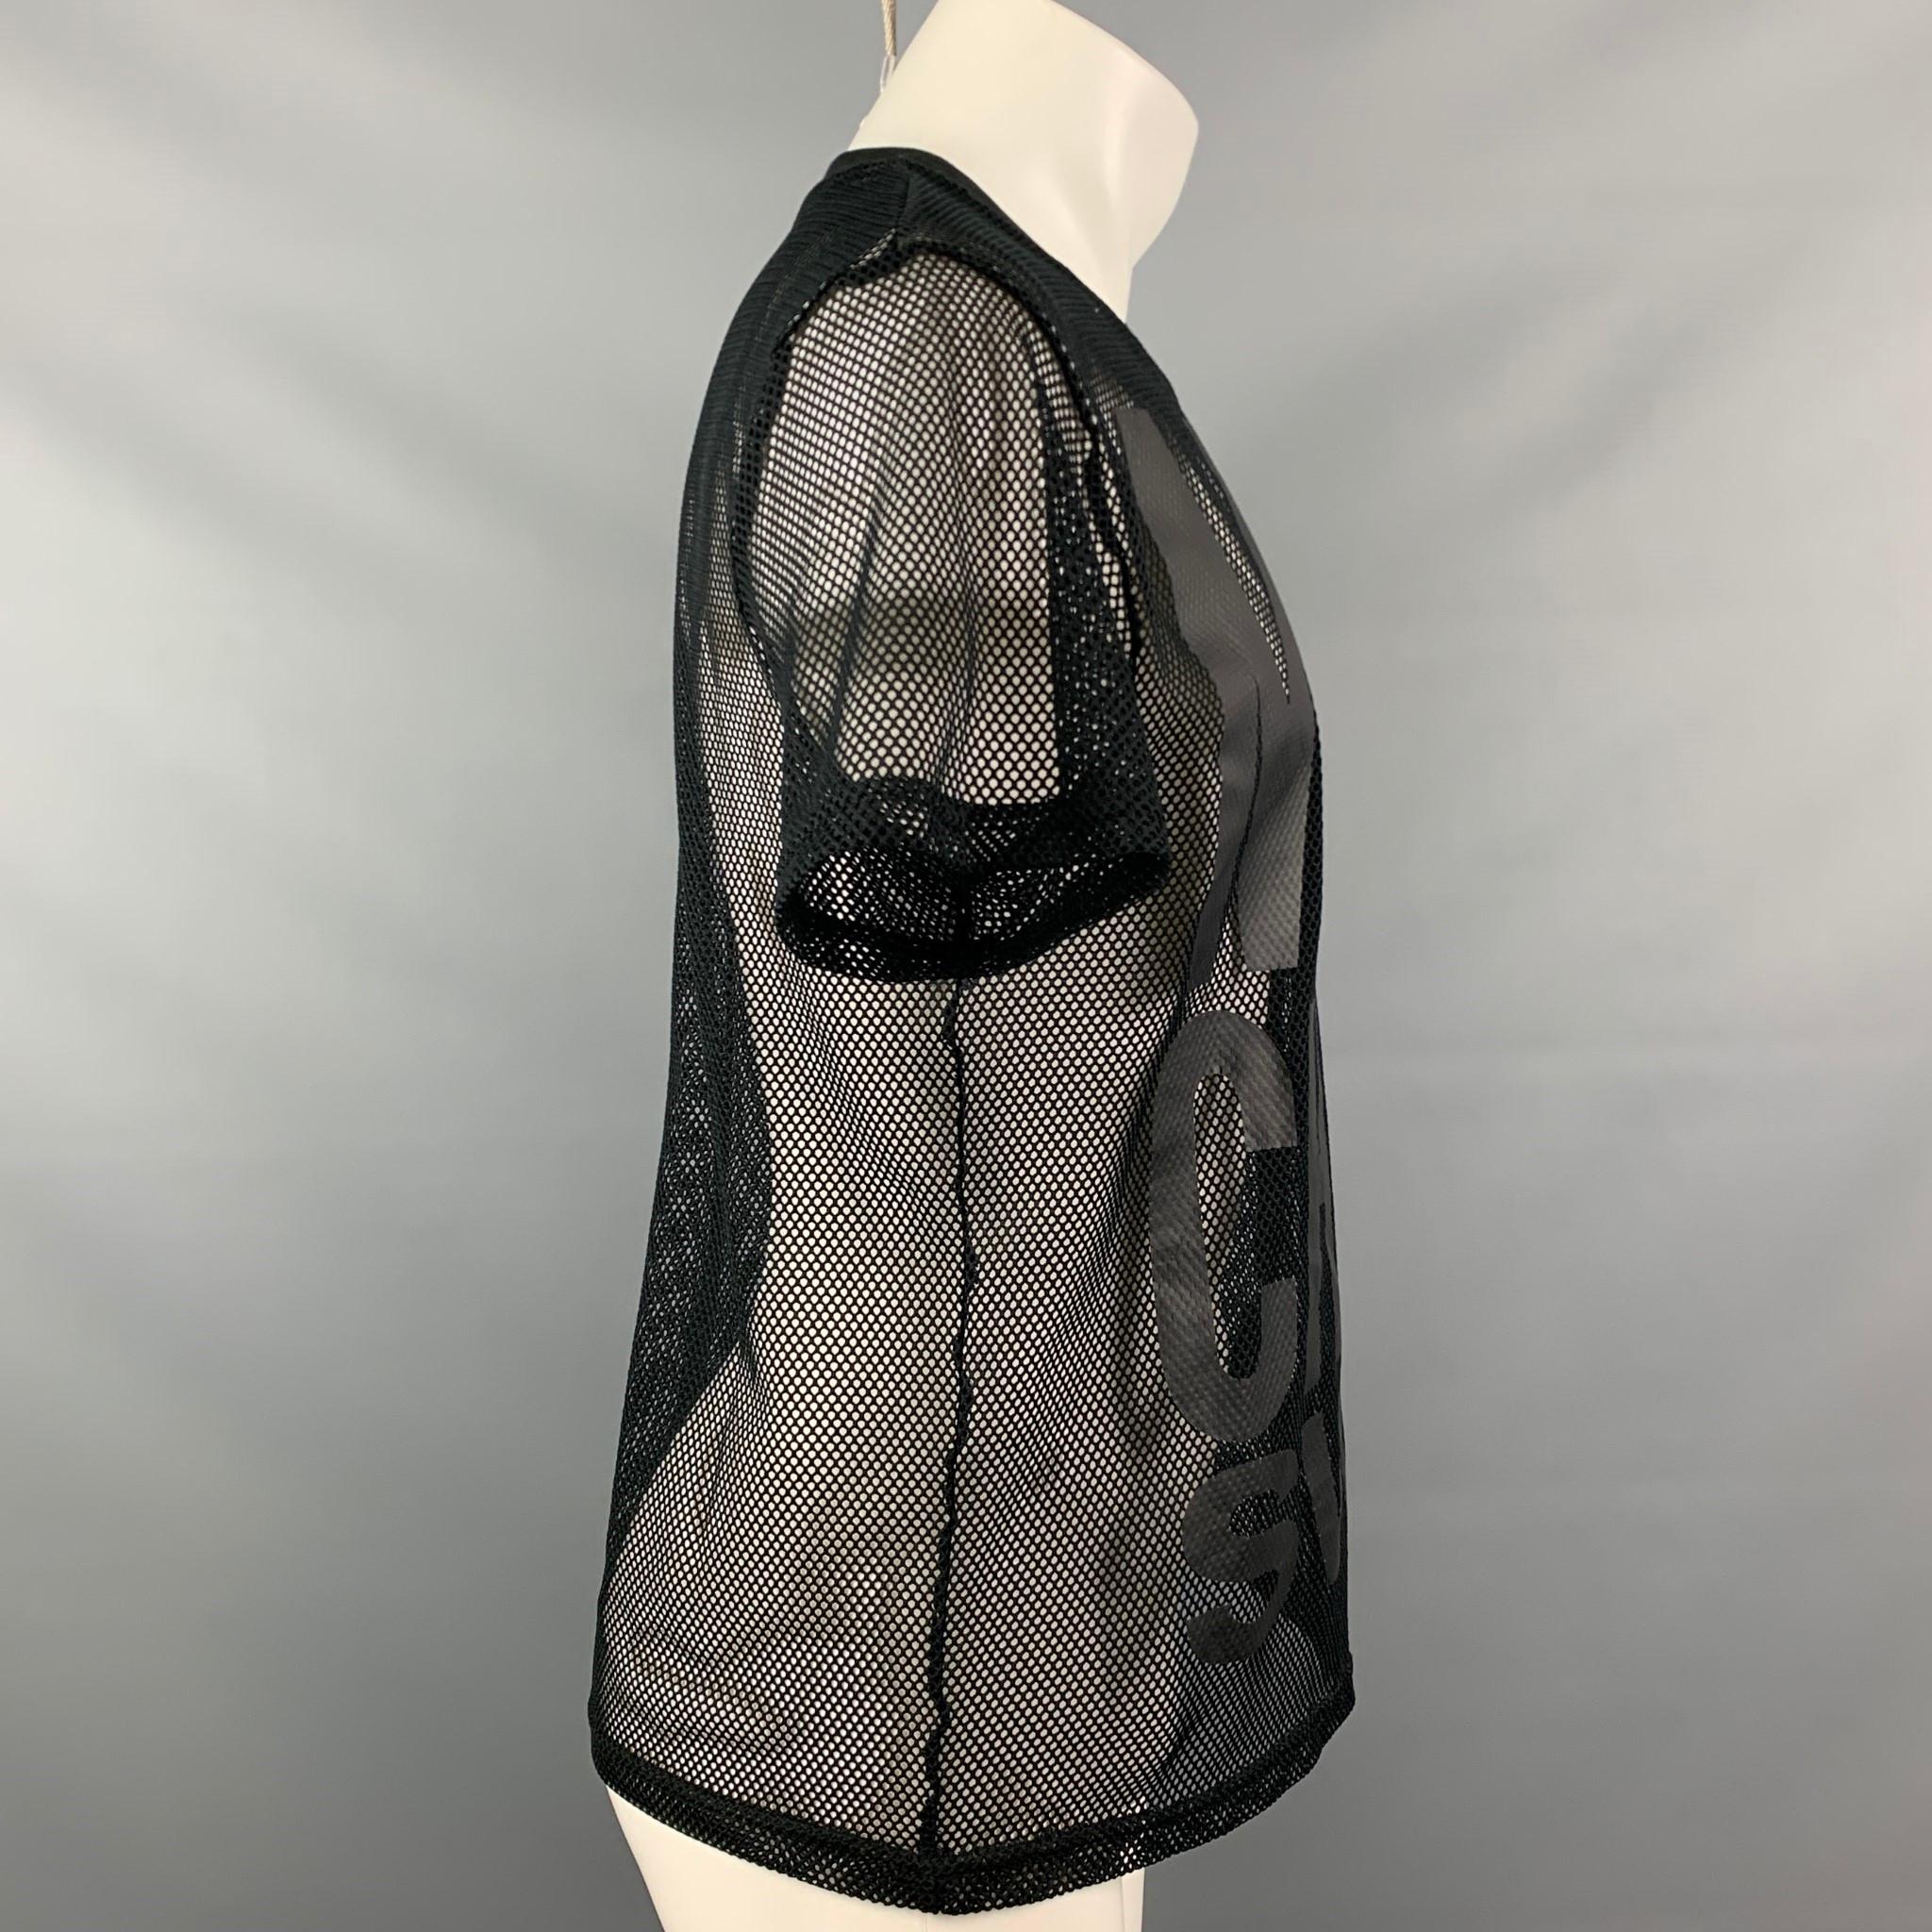 MOSCHINO Swim comes in a black mesh material featuring a front logo design and a crew-neck.

Very Good Pre-Owned Condition.
Marked: I M / F M / EU M / UK M / USA S

Measurements:

Shoulder: 17.5 in.
Chest: 40 in.
Sleeve: 10 in.
Length: 26 in  